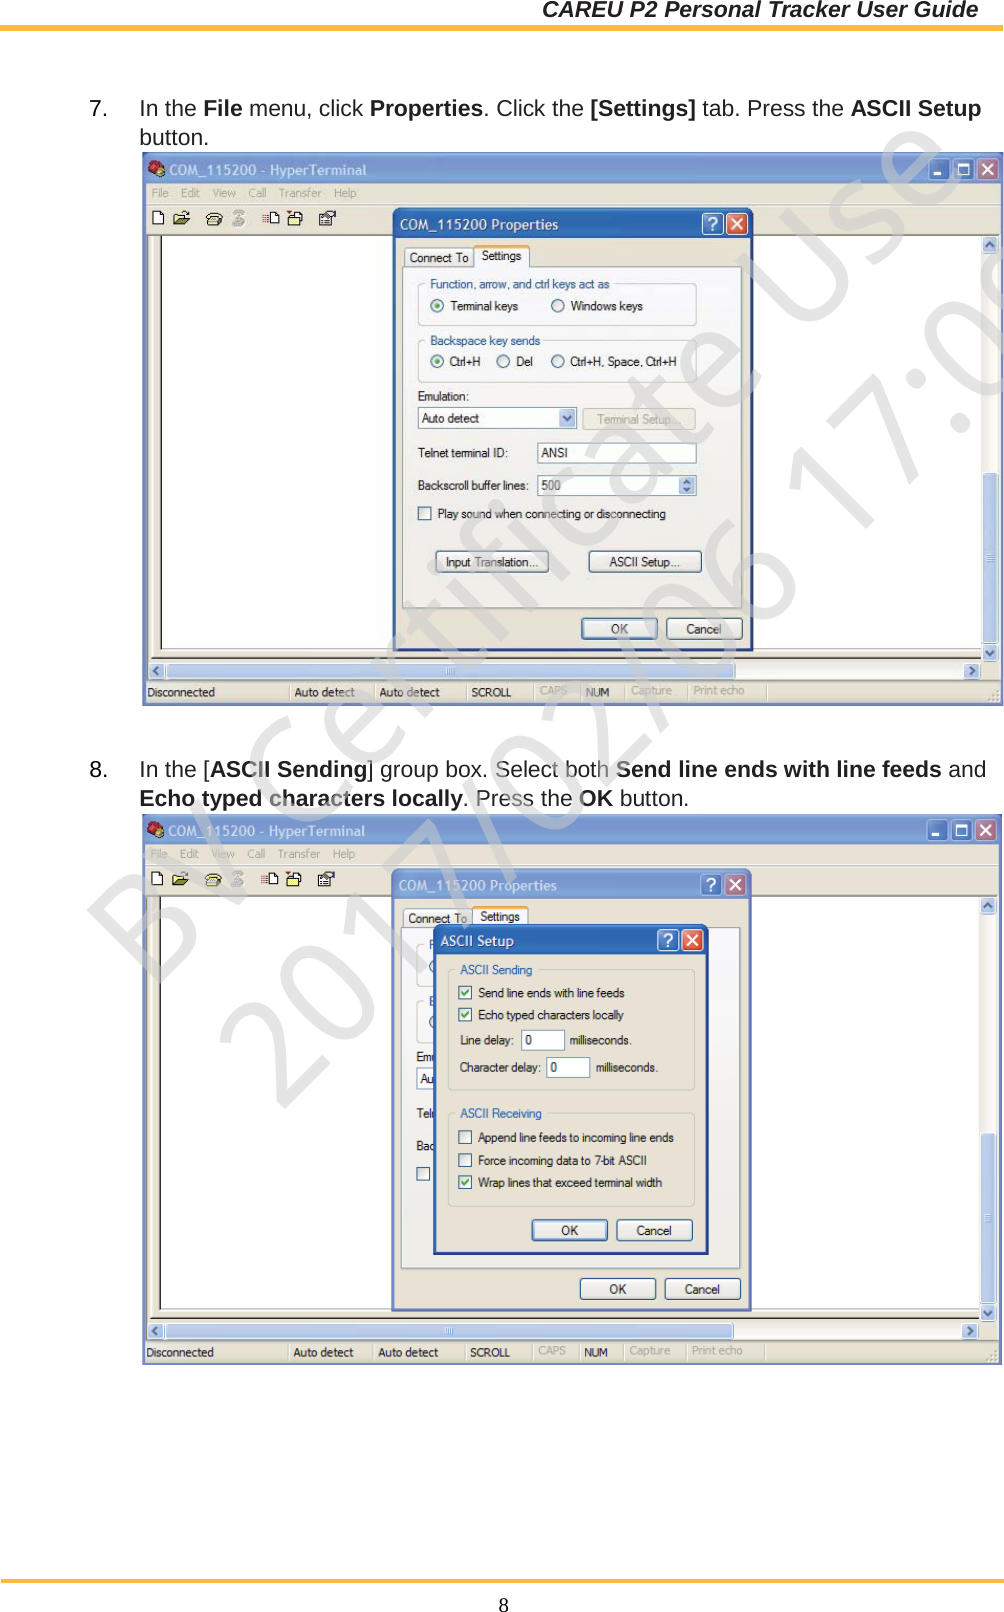 CAREU P2 Personal Tracker User Guide  8  7. In the File menu, click Properties. Click the [Settings] tab. Press the ASCII Setup button.    8. In the [ASCII Sending] group box. Select both Send line ends with line feeds and Echo typed characters locally. Press the OK button.         BV Certificate Use2017/02/06 17:09